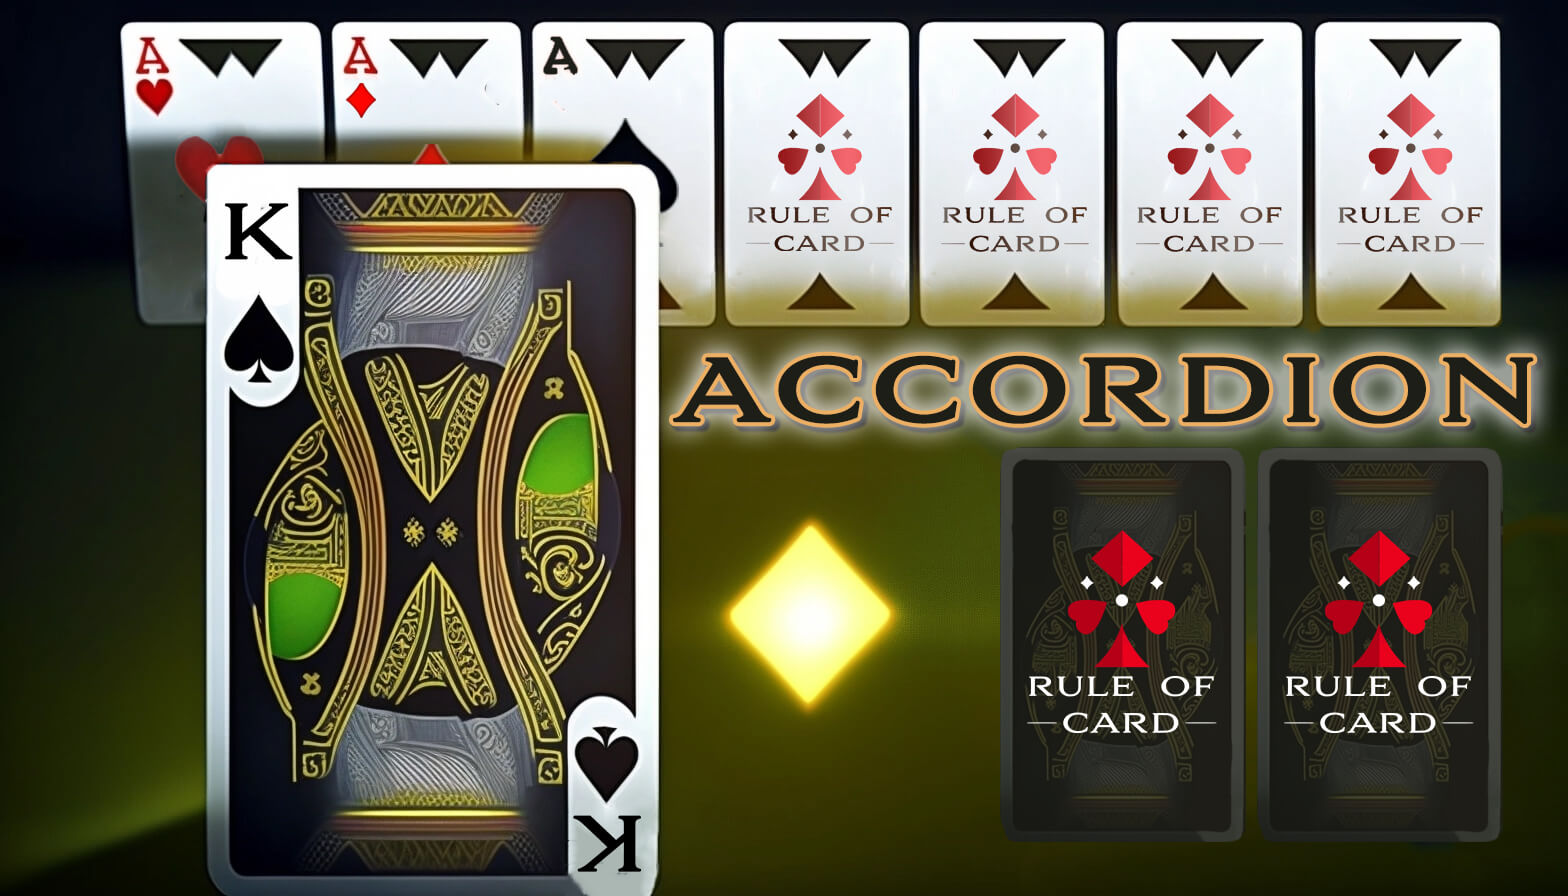 Playing the card game Accordion